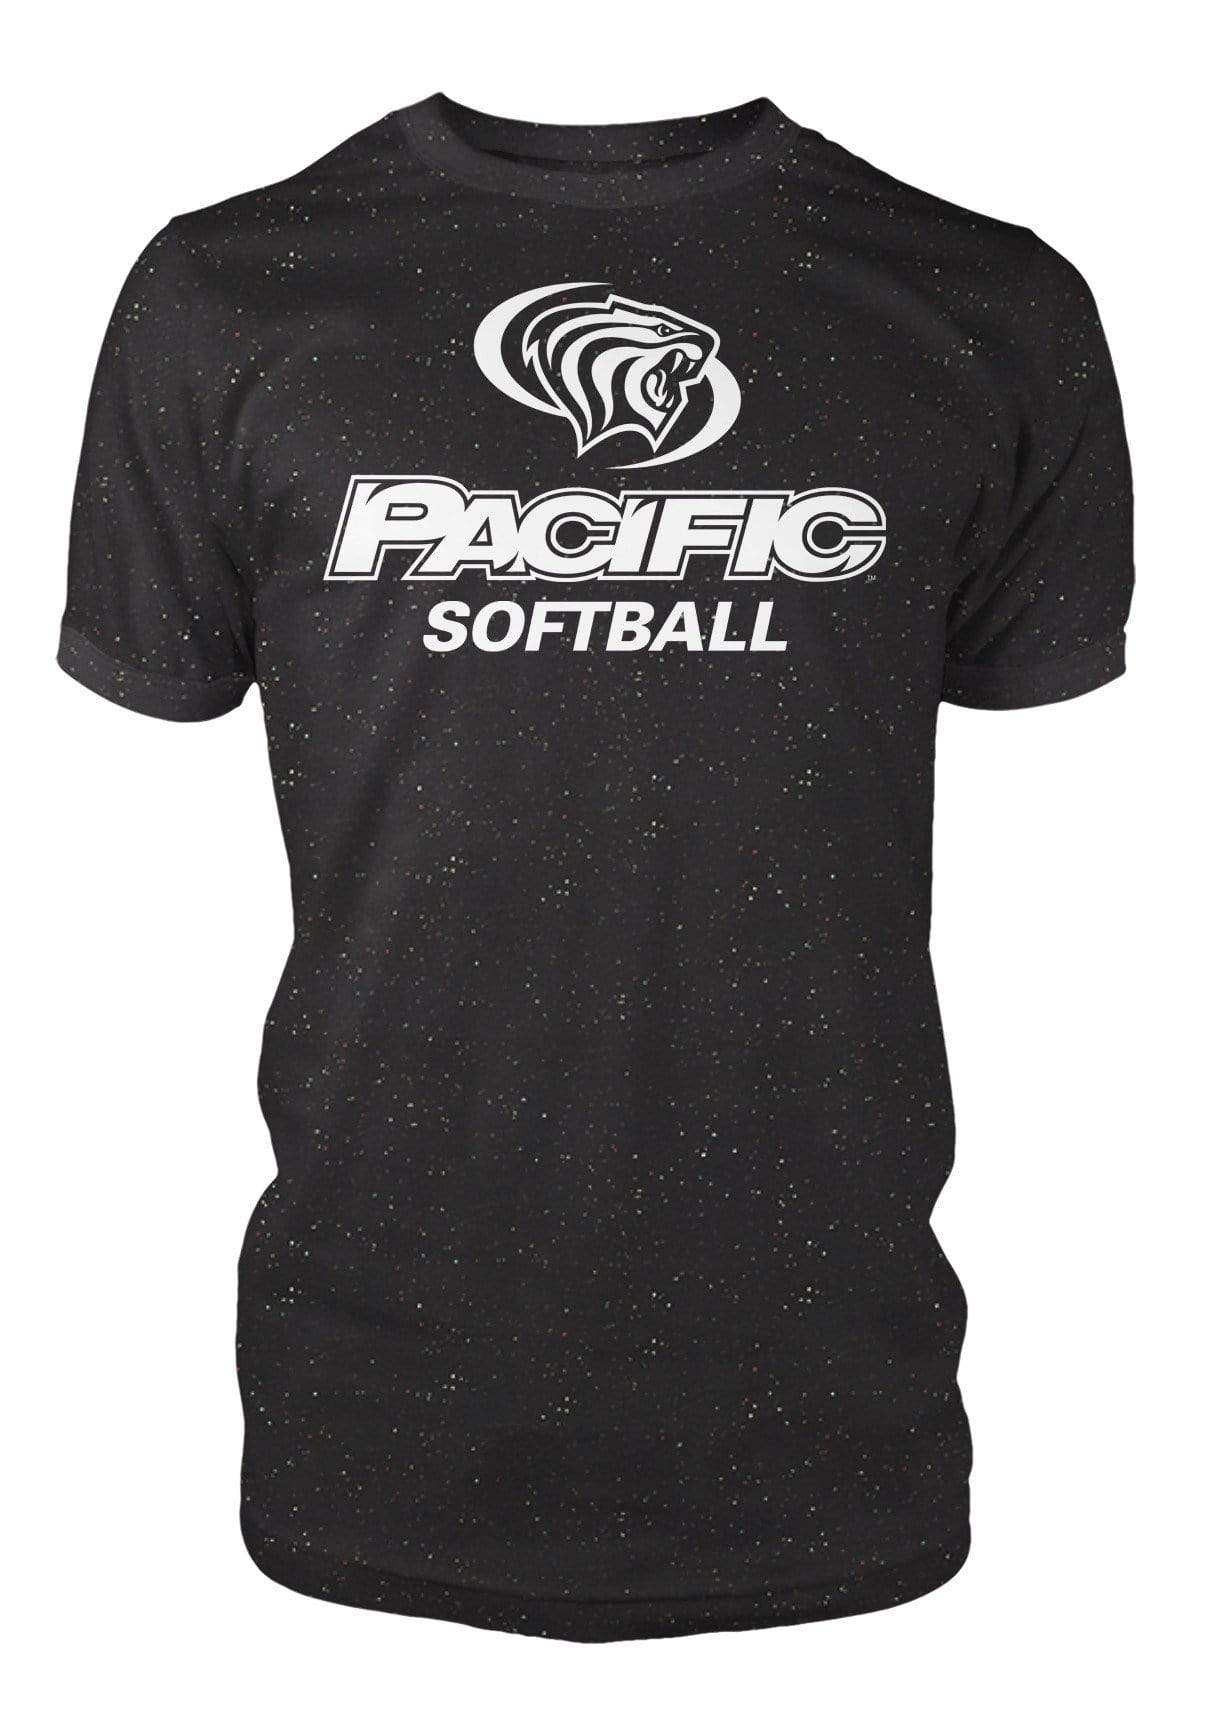 University of the Pacific Tigers Softball Division I T-shirt by Zeus Collegiate